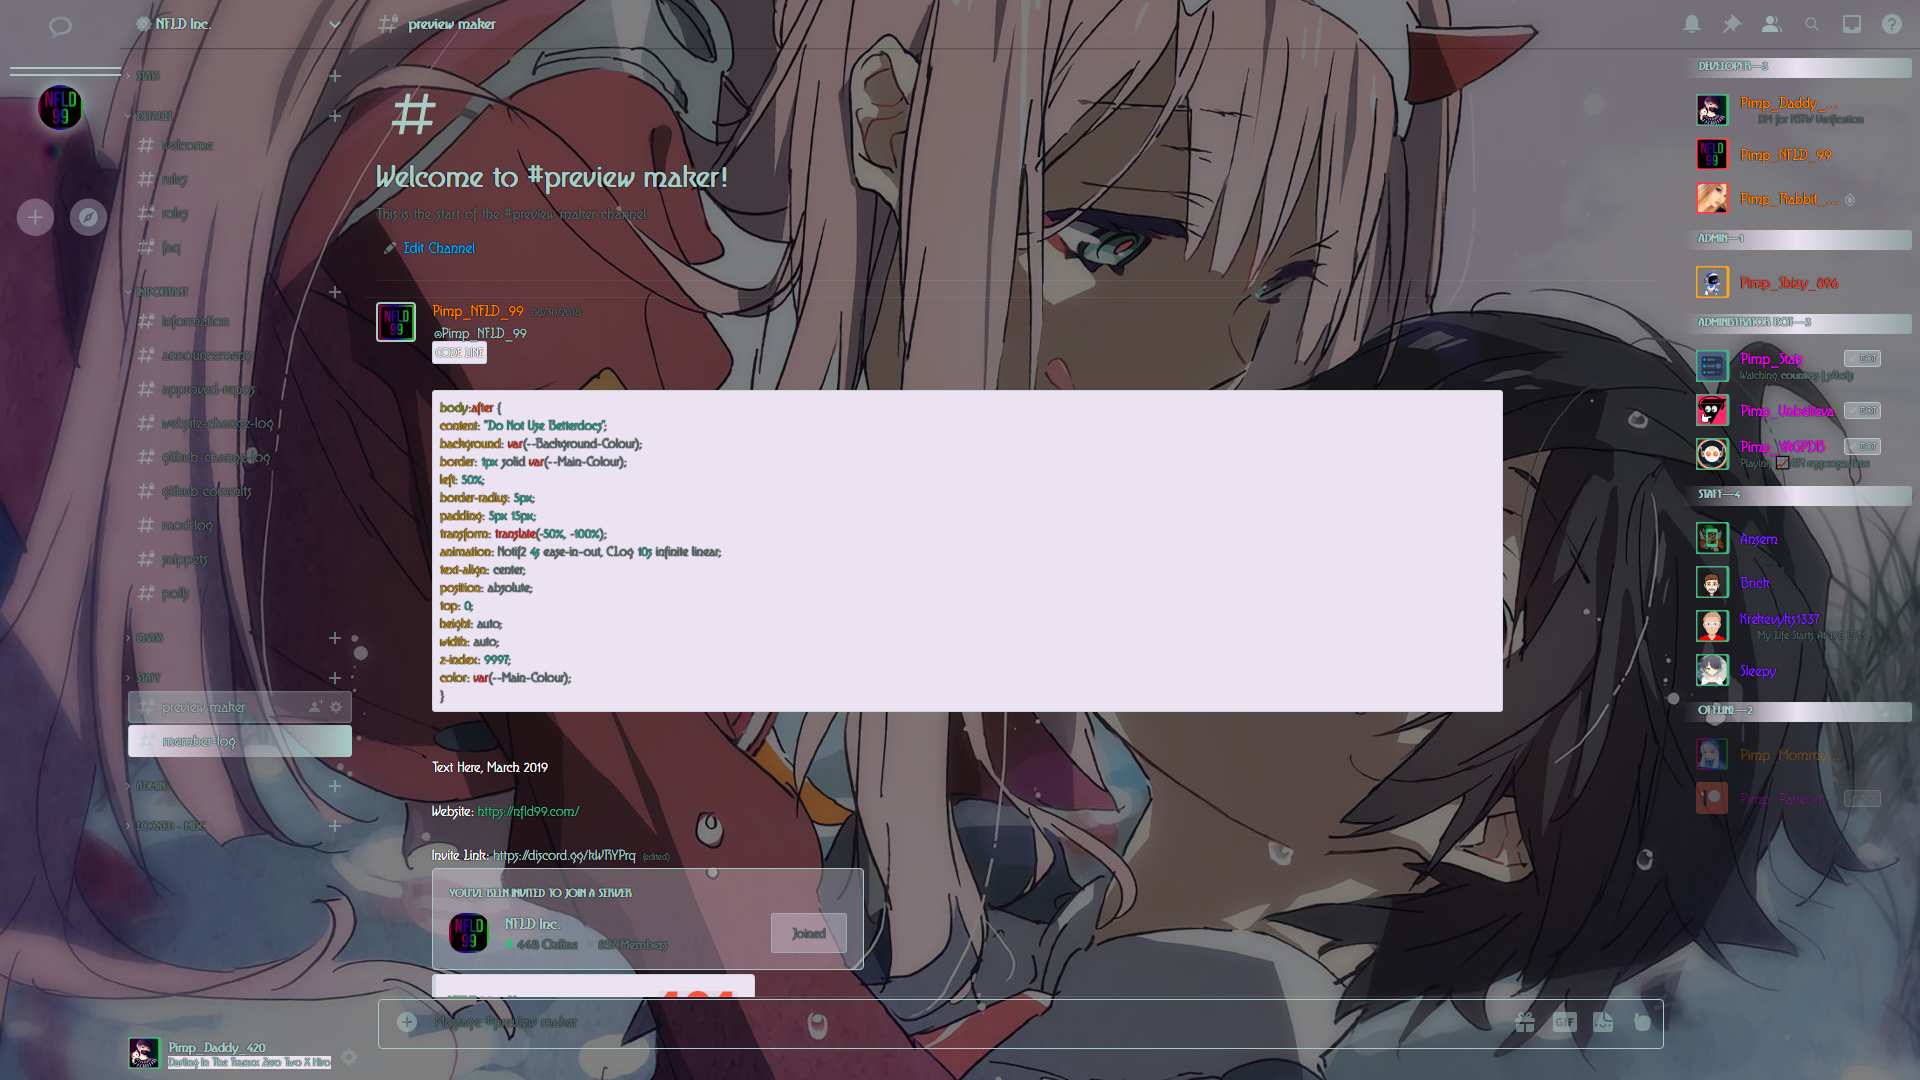 anime better discord themes